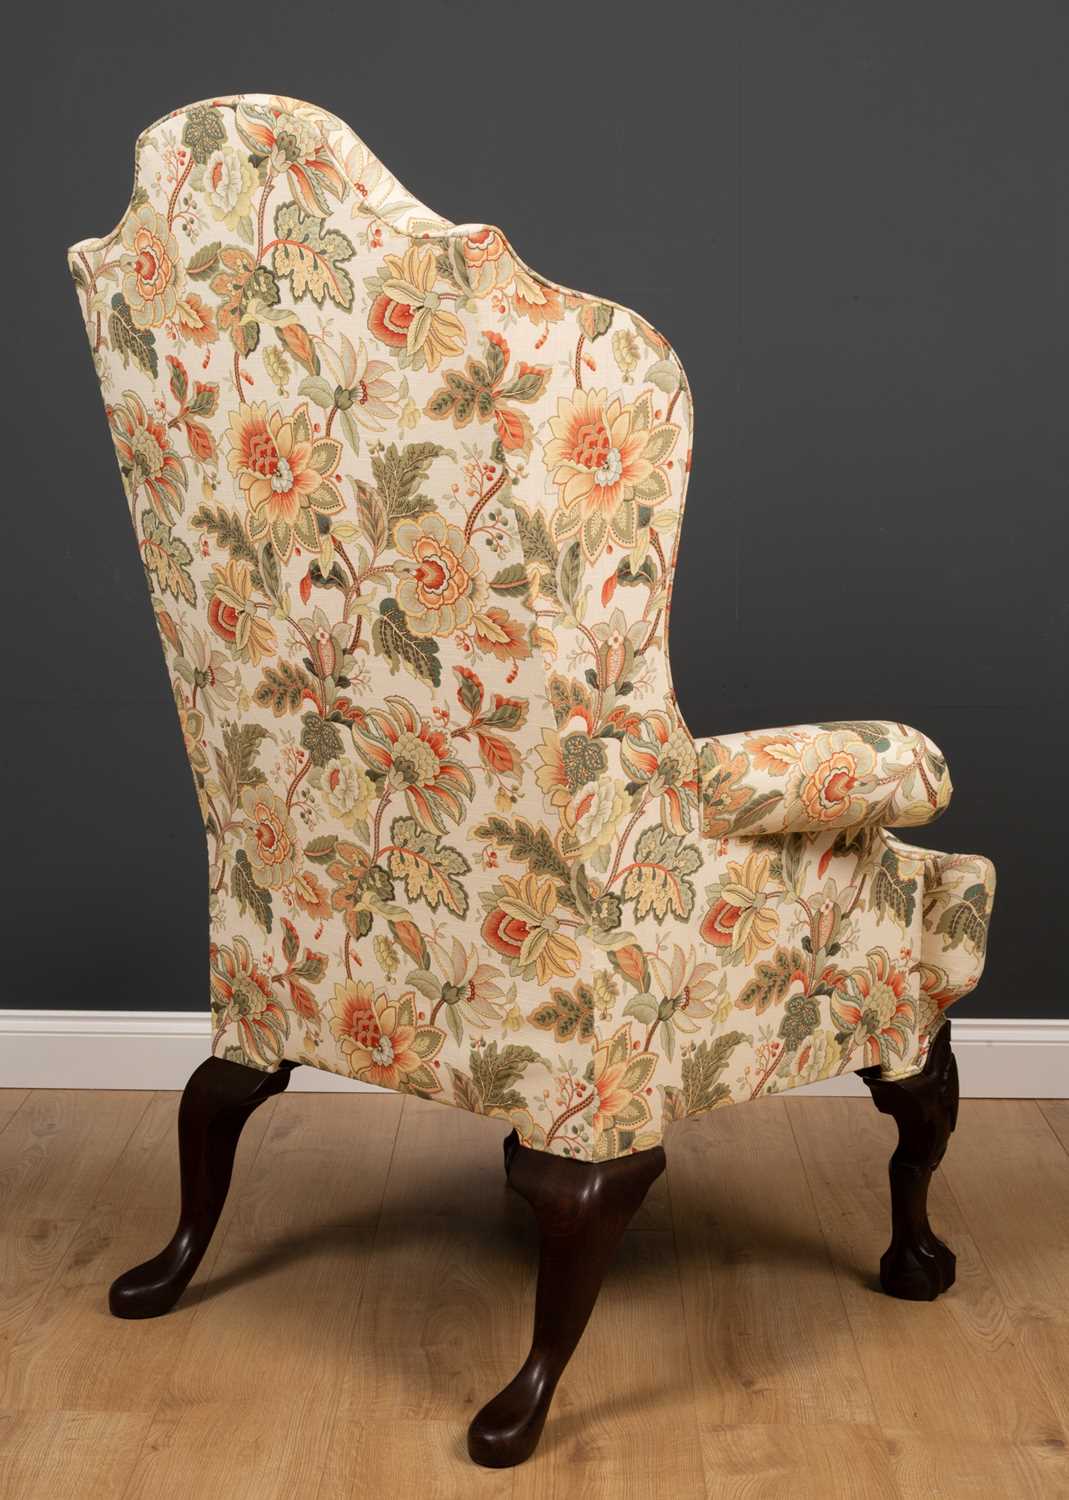 A George II style wingback armchair with floral upholstery and label for 'The Odd Chair Company' - Image 3 of 7